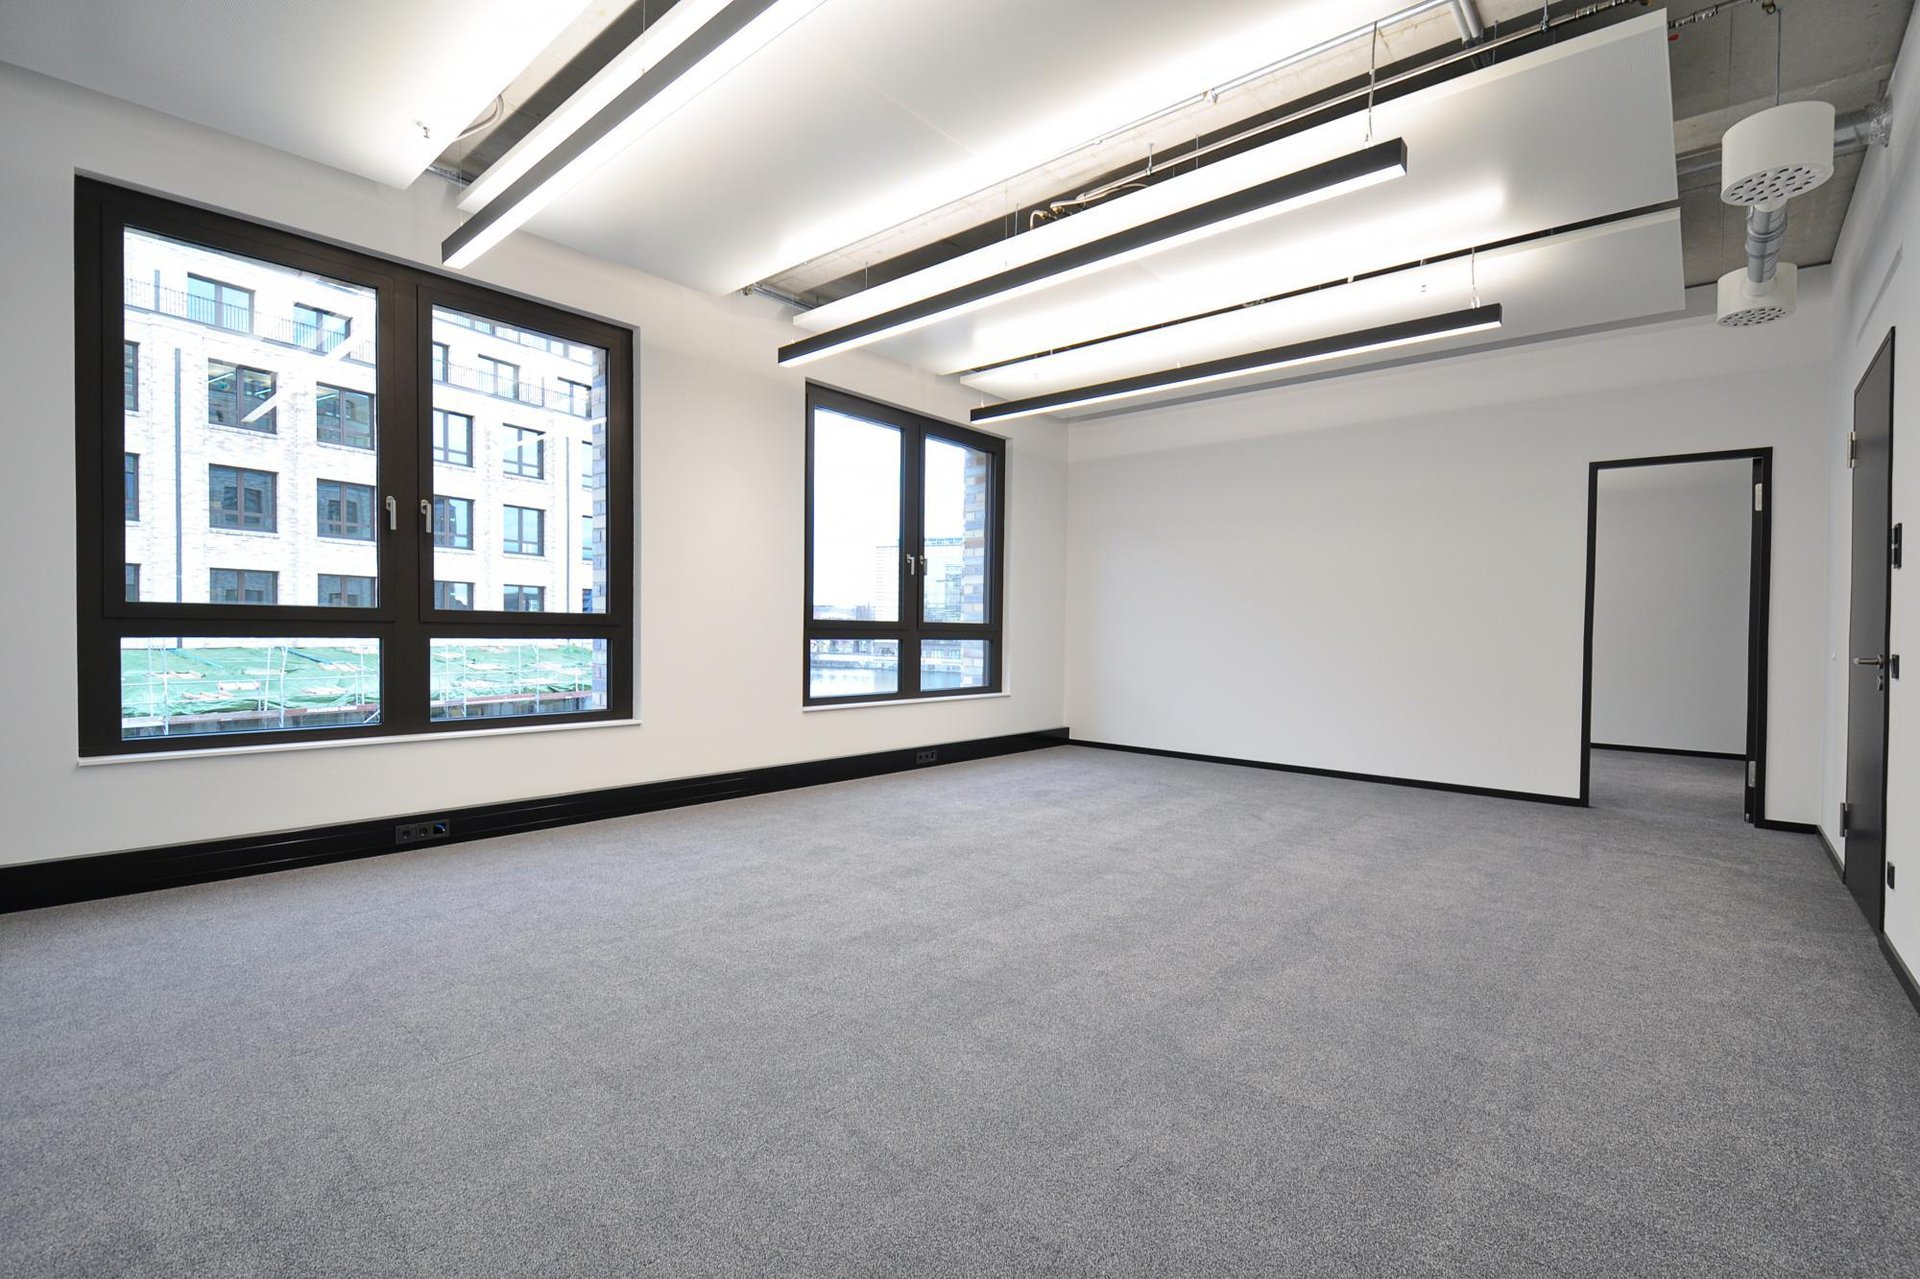 Büro für 8 Pers. in Scaling Spaces at Cuvry Campus